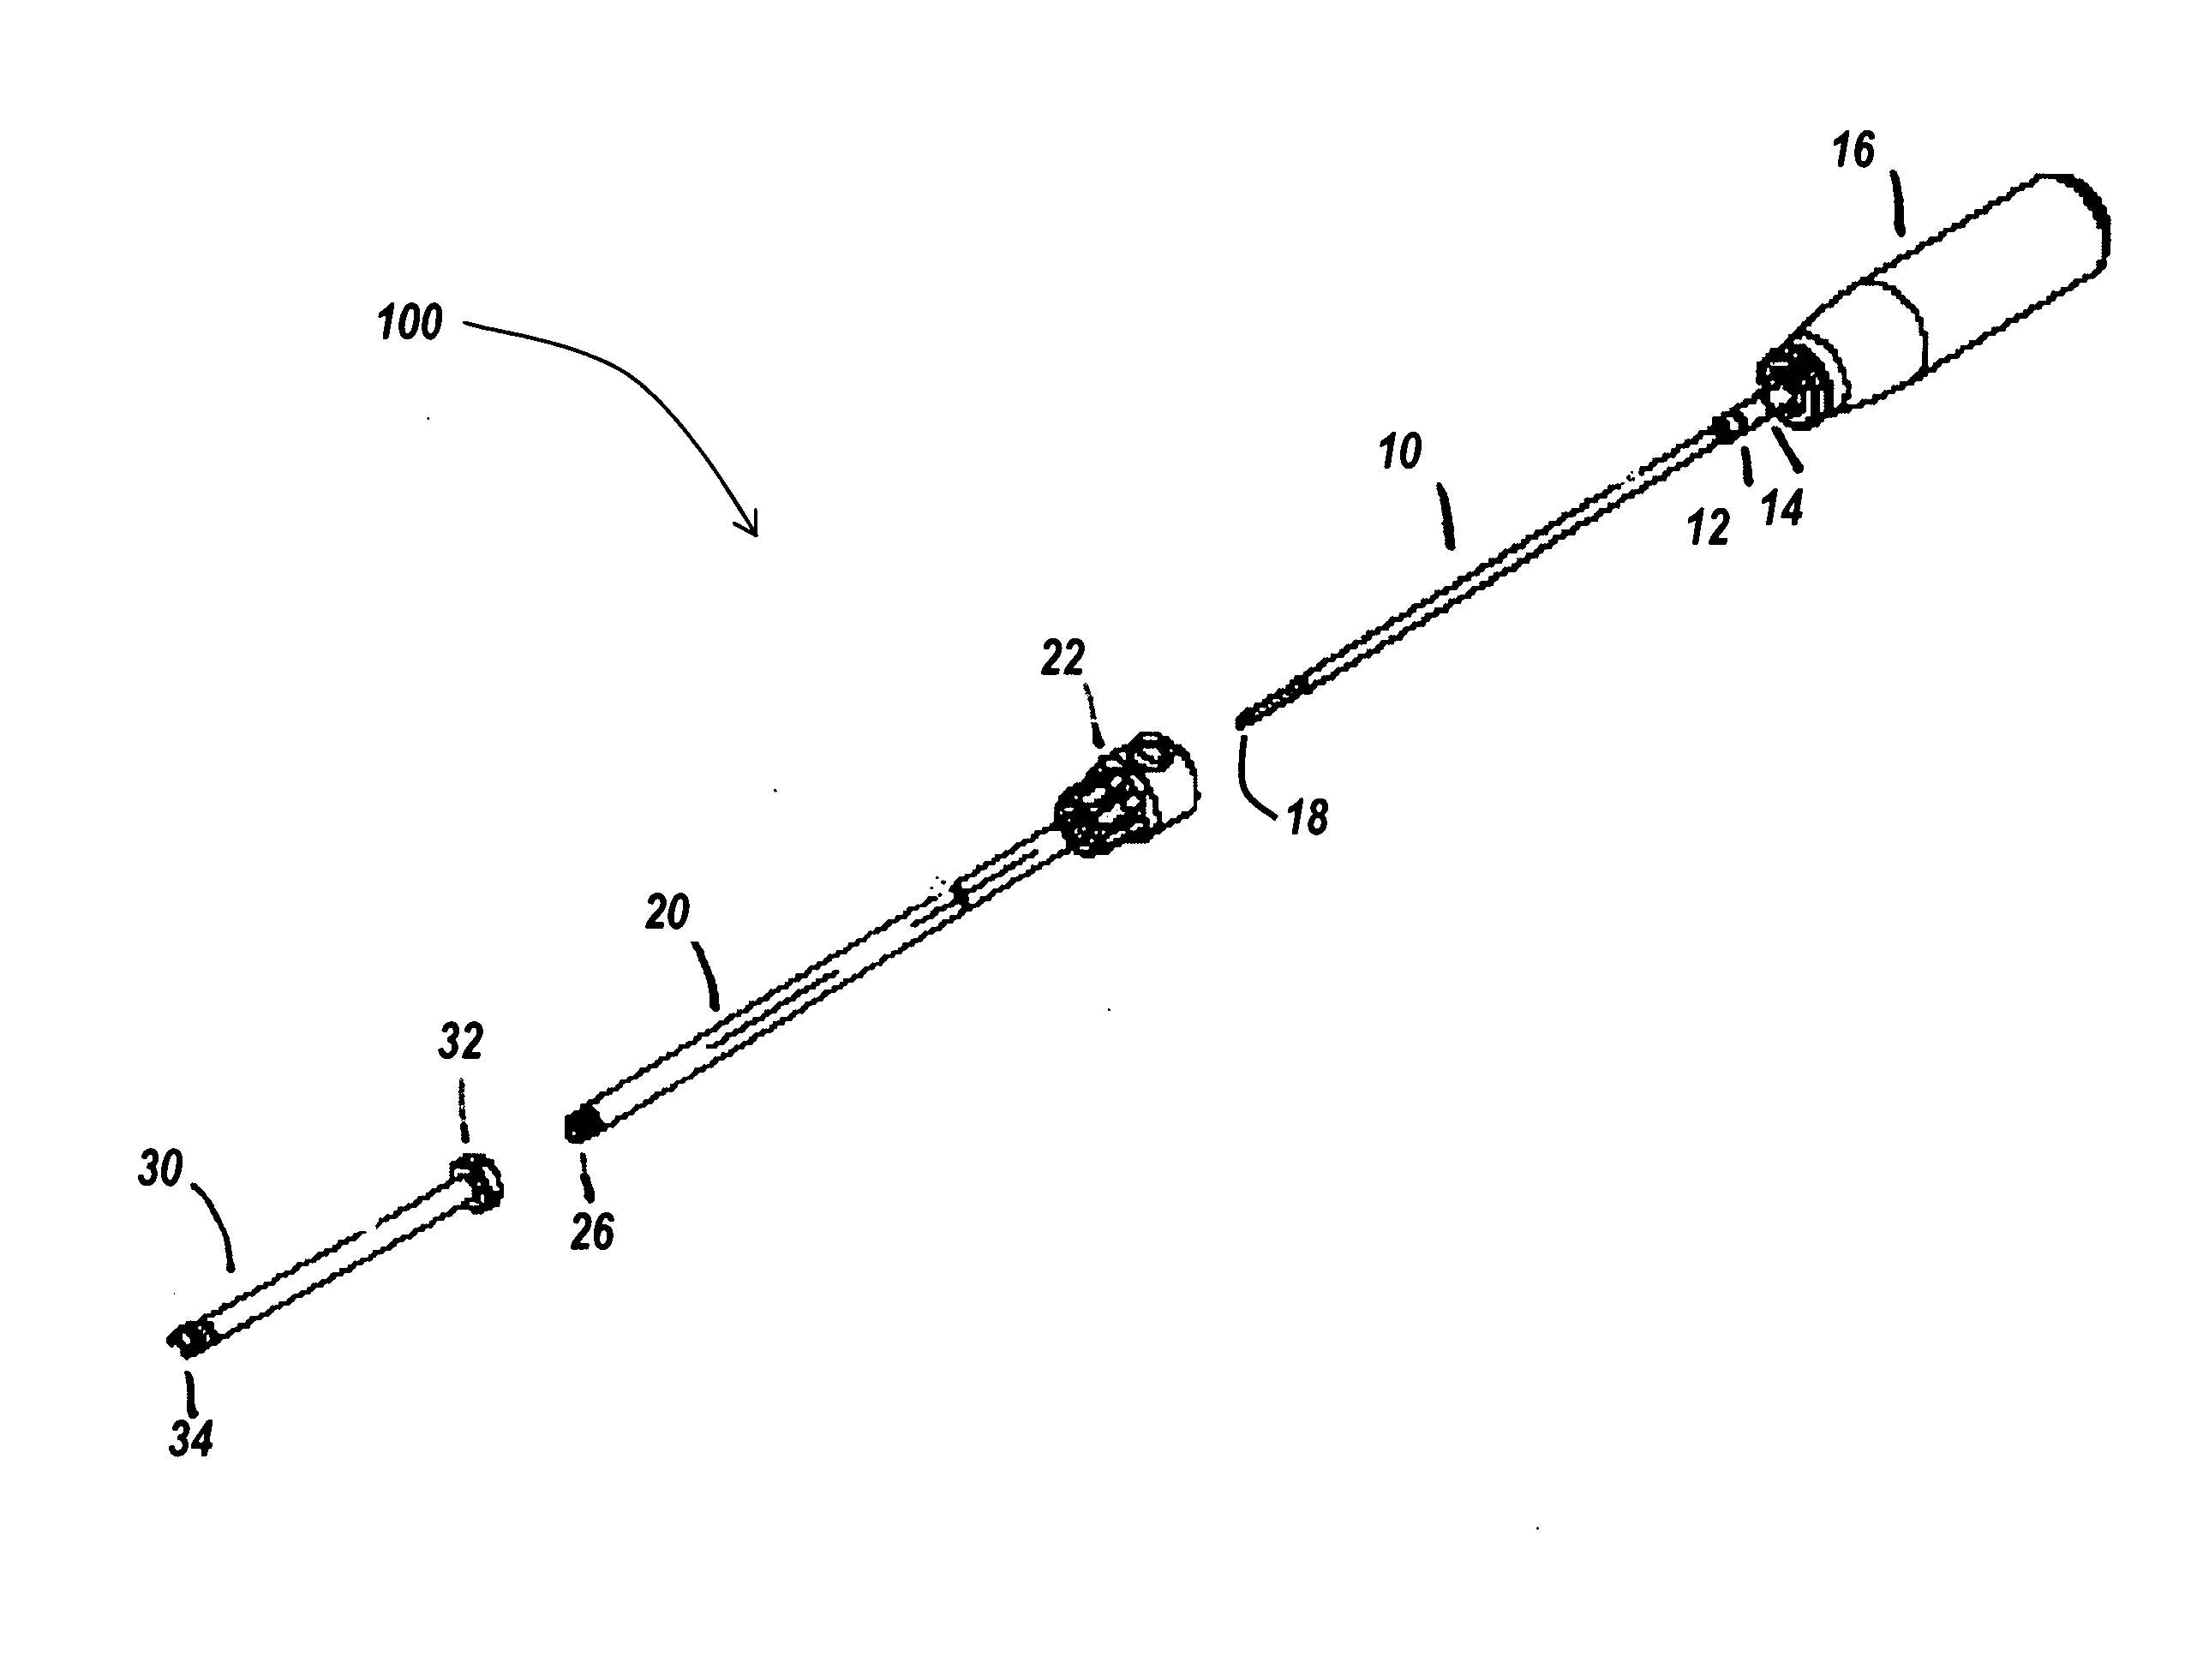 Instrument for inserting, adjusting and removing a surgical implant